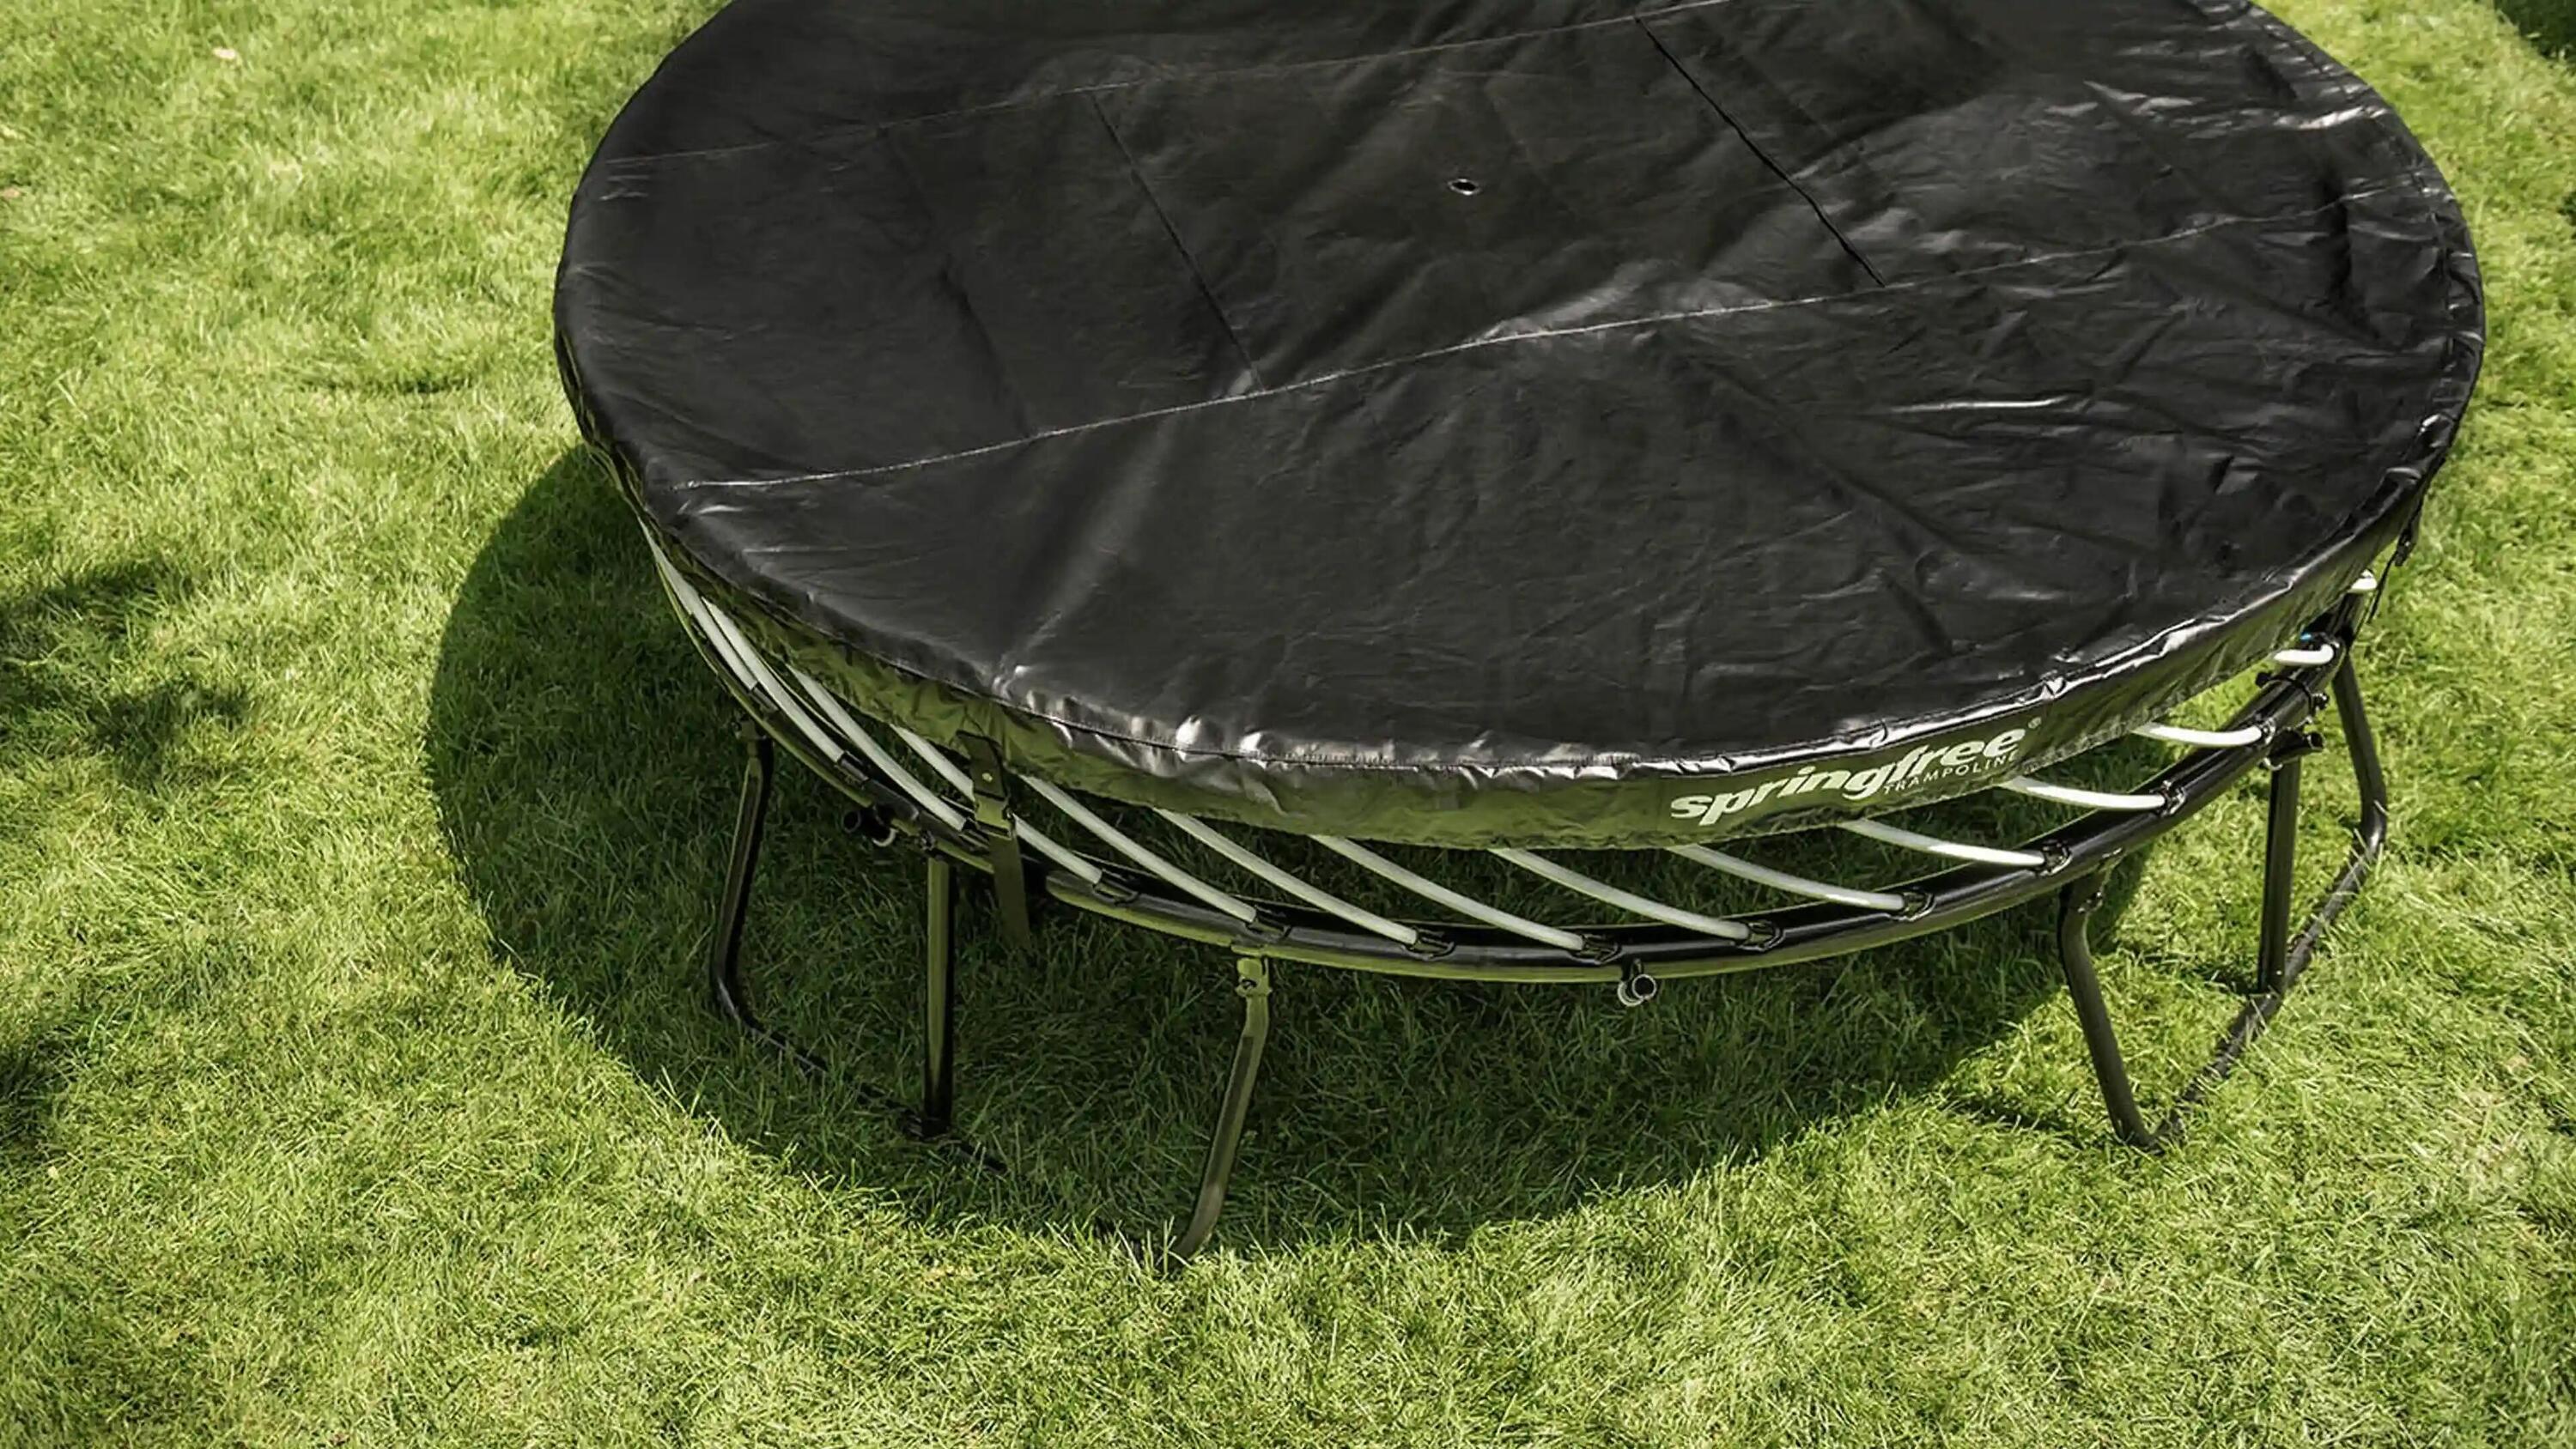 Springfree Trampoline All-Weather Cover for Large Oval 2/3